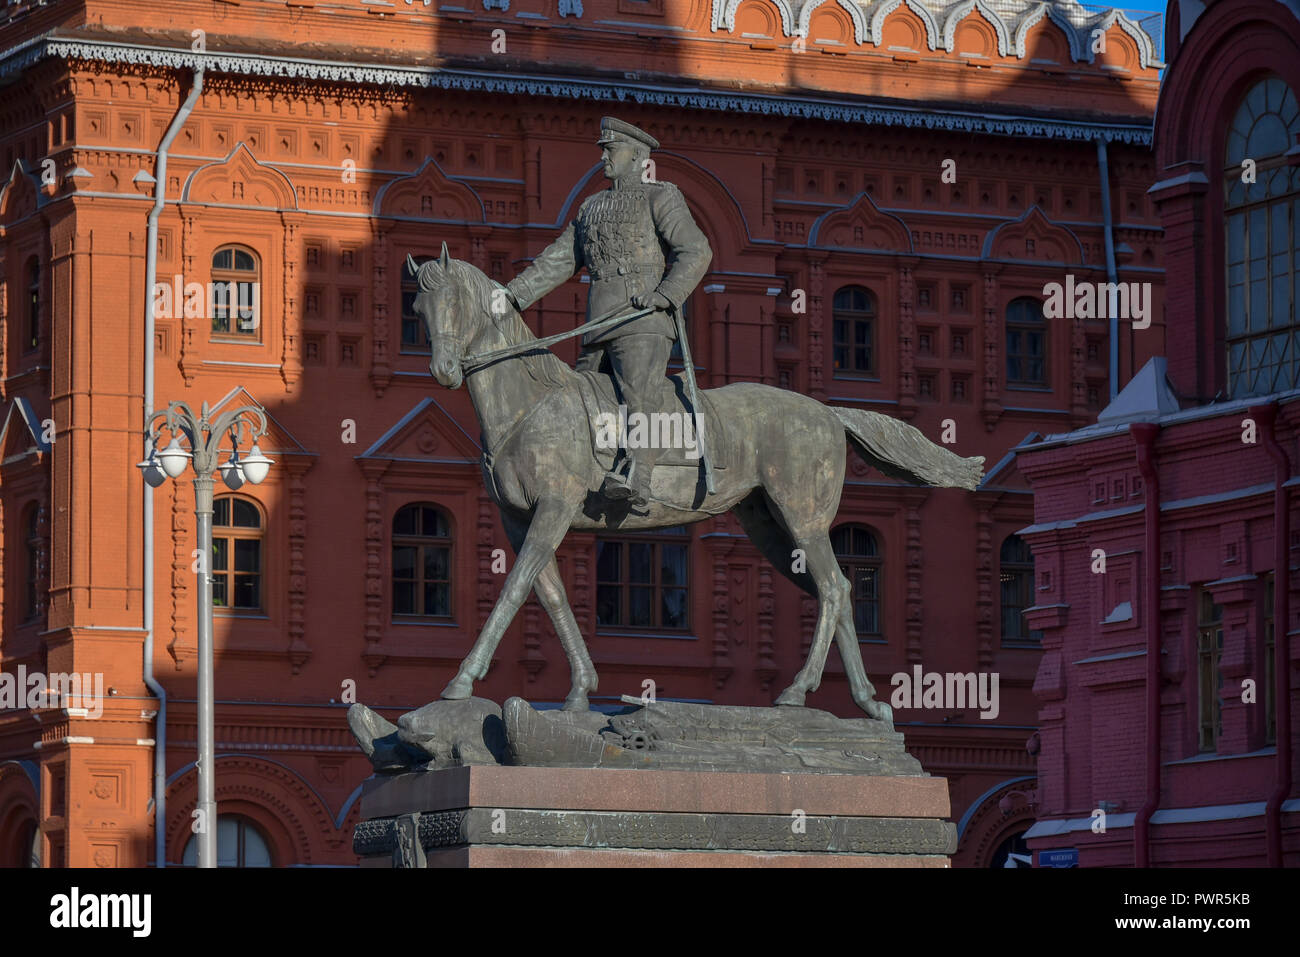 Moscow, Russia - 16 October, 2018: Monument to the Soviet Red Army General Georgy Zhukov near the Red Square in Moscow, Russia. Stock Photo